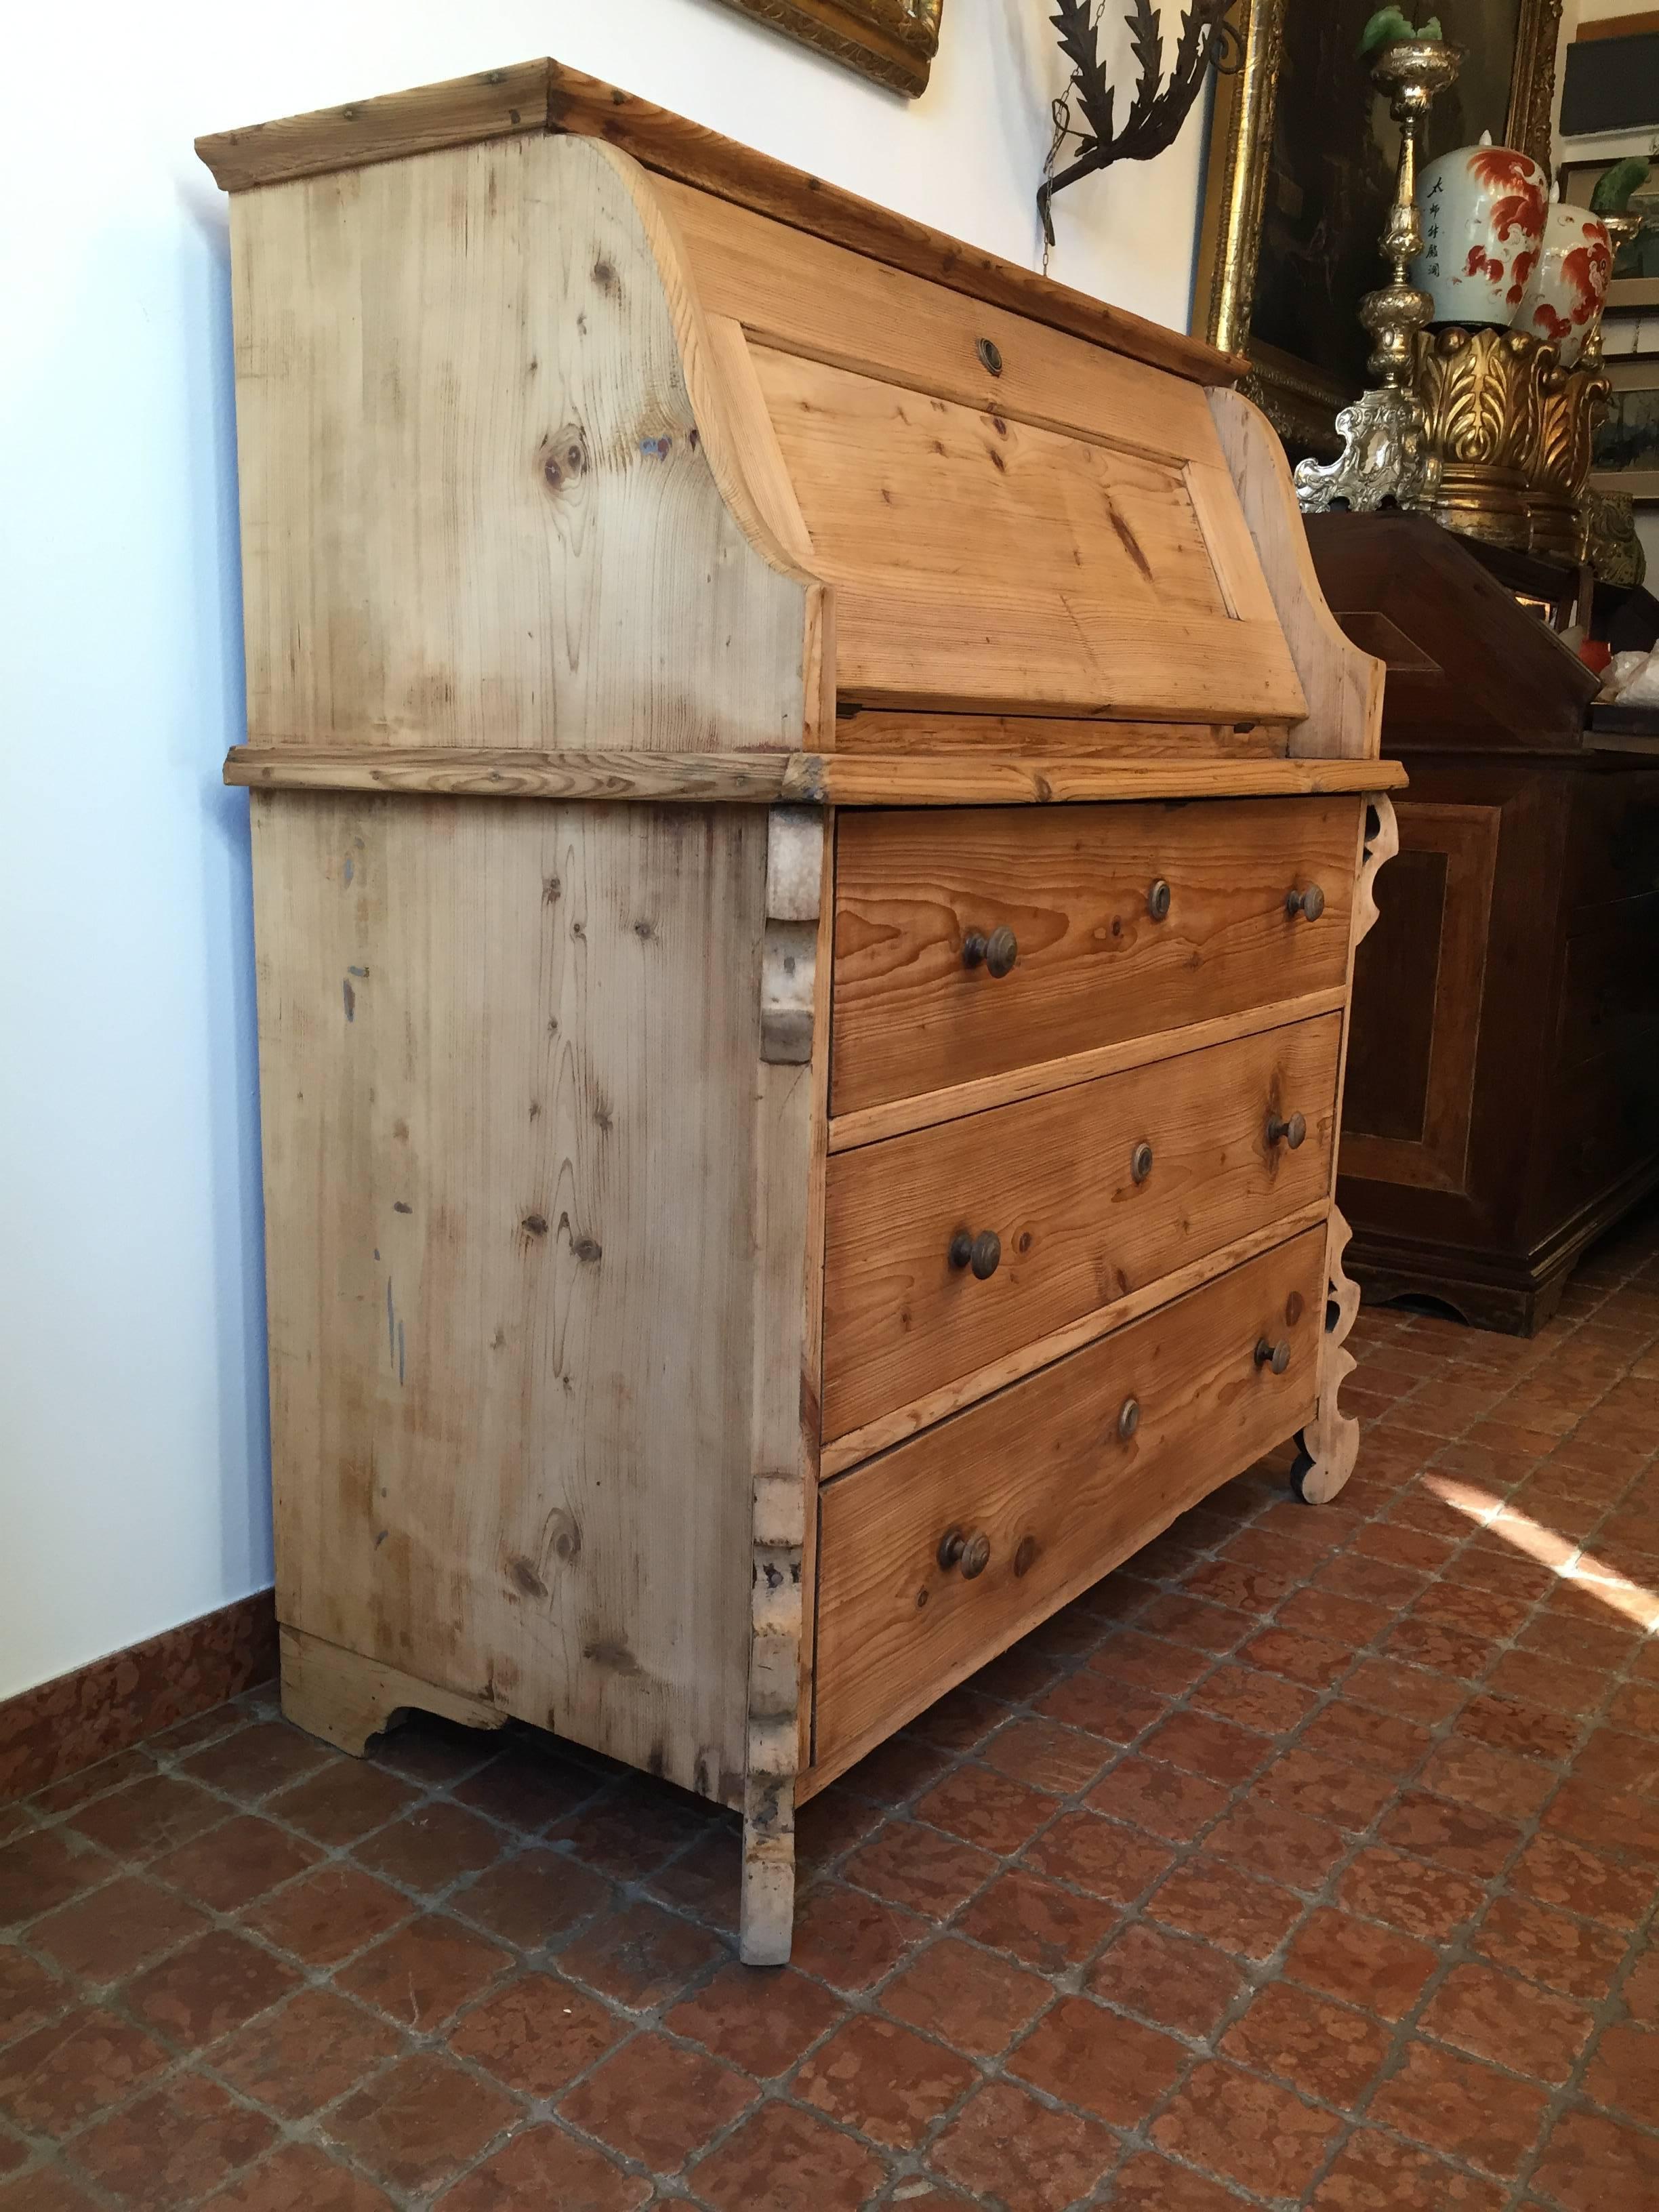 Antique chest of drawer with flap, Italian Louis Philippe solid larch wood bureau with flap dating back to mid-19th century.
Very similar to farmhouse furniture, this antique wooden bureau is typical of the Italian Alps mountains of Northern Italy,